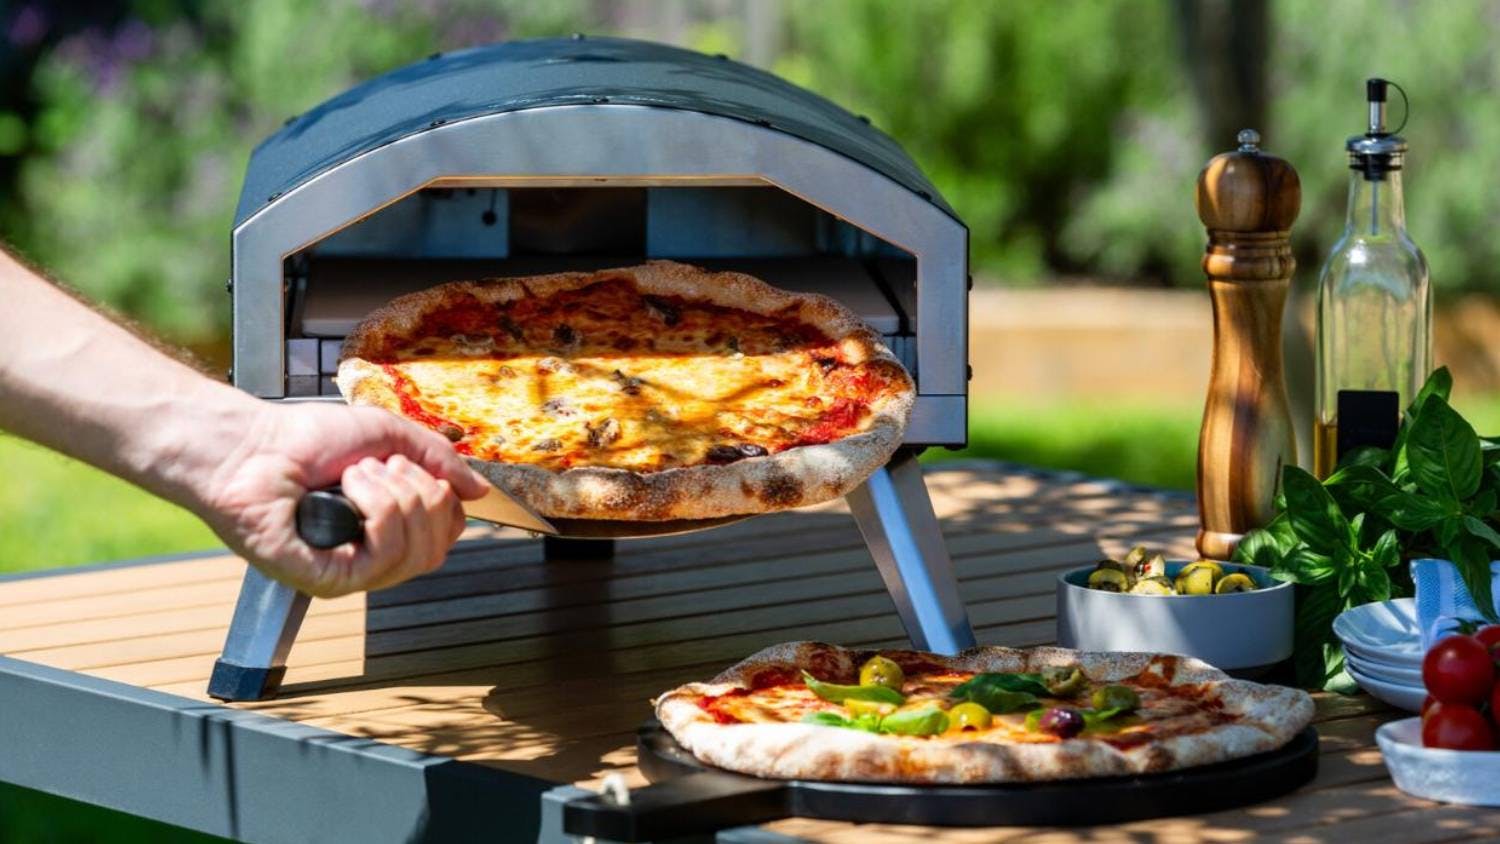 Healthy Choice Portable Electric Pizza Oven with Pizza Stone 30.5cm